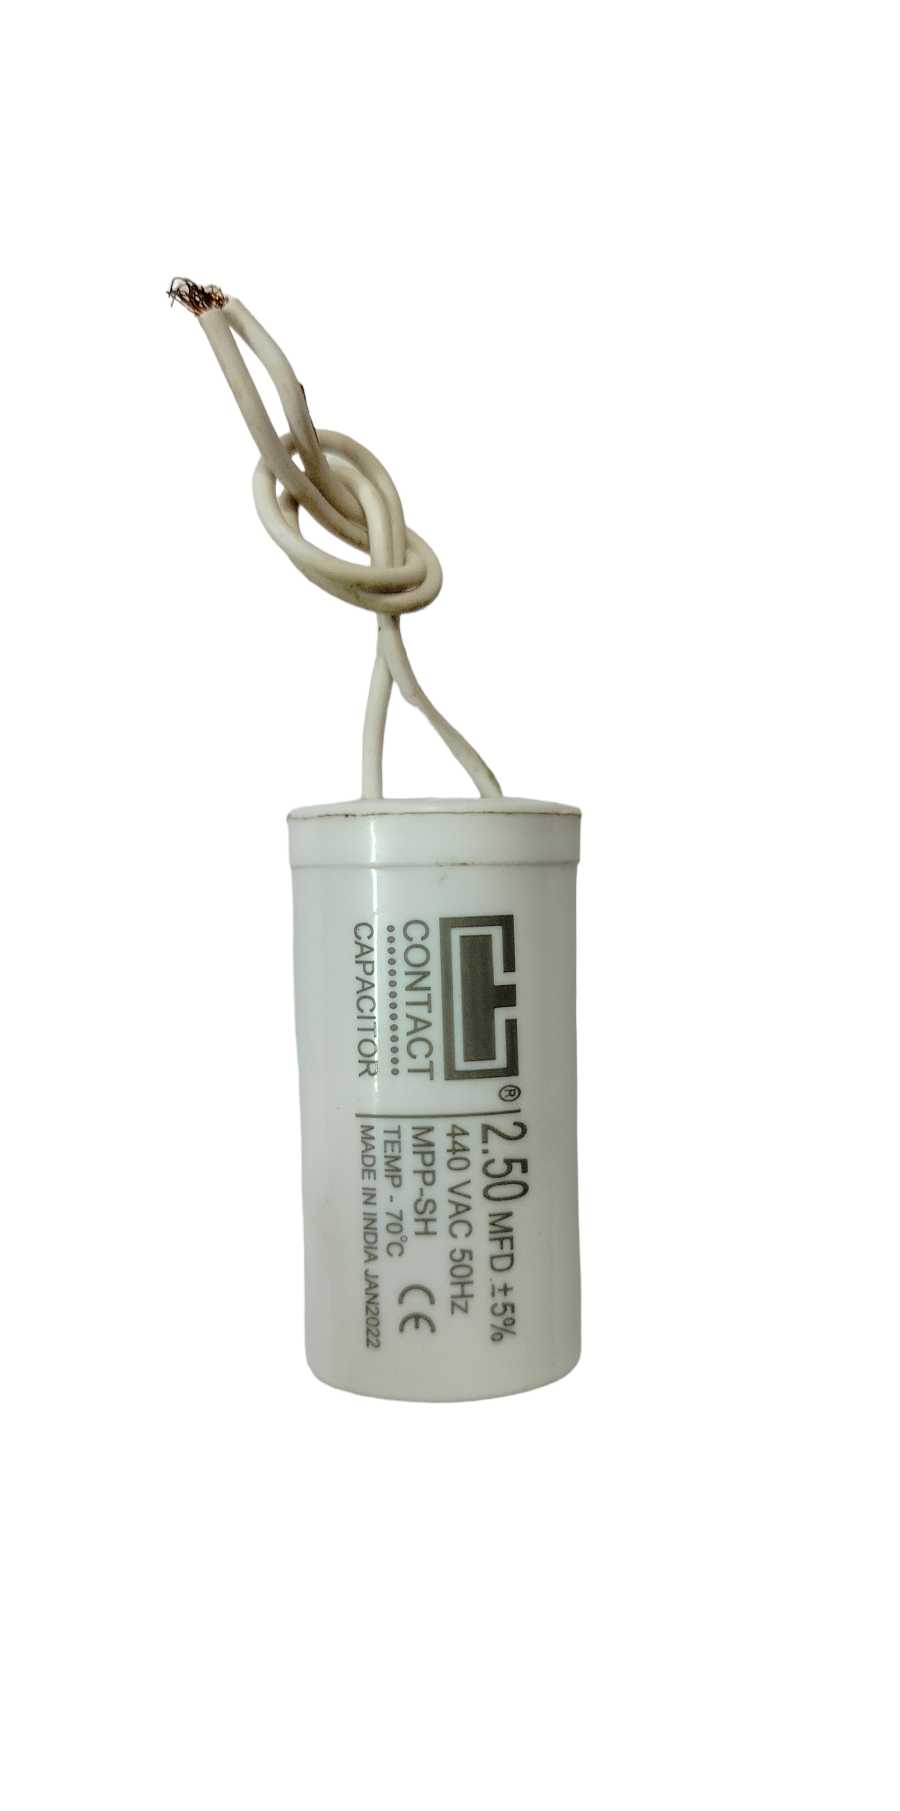 Contact Capacitor 2.50 MFD Supplier in bareilly